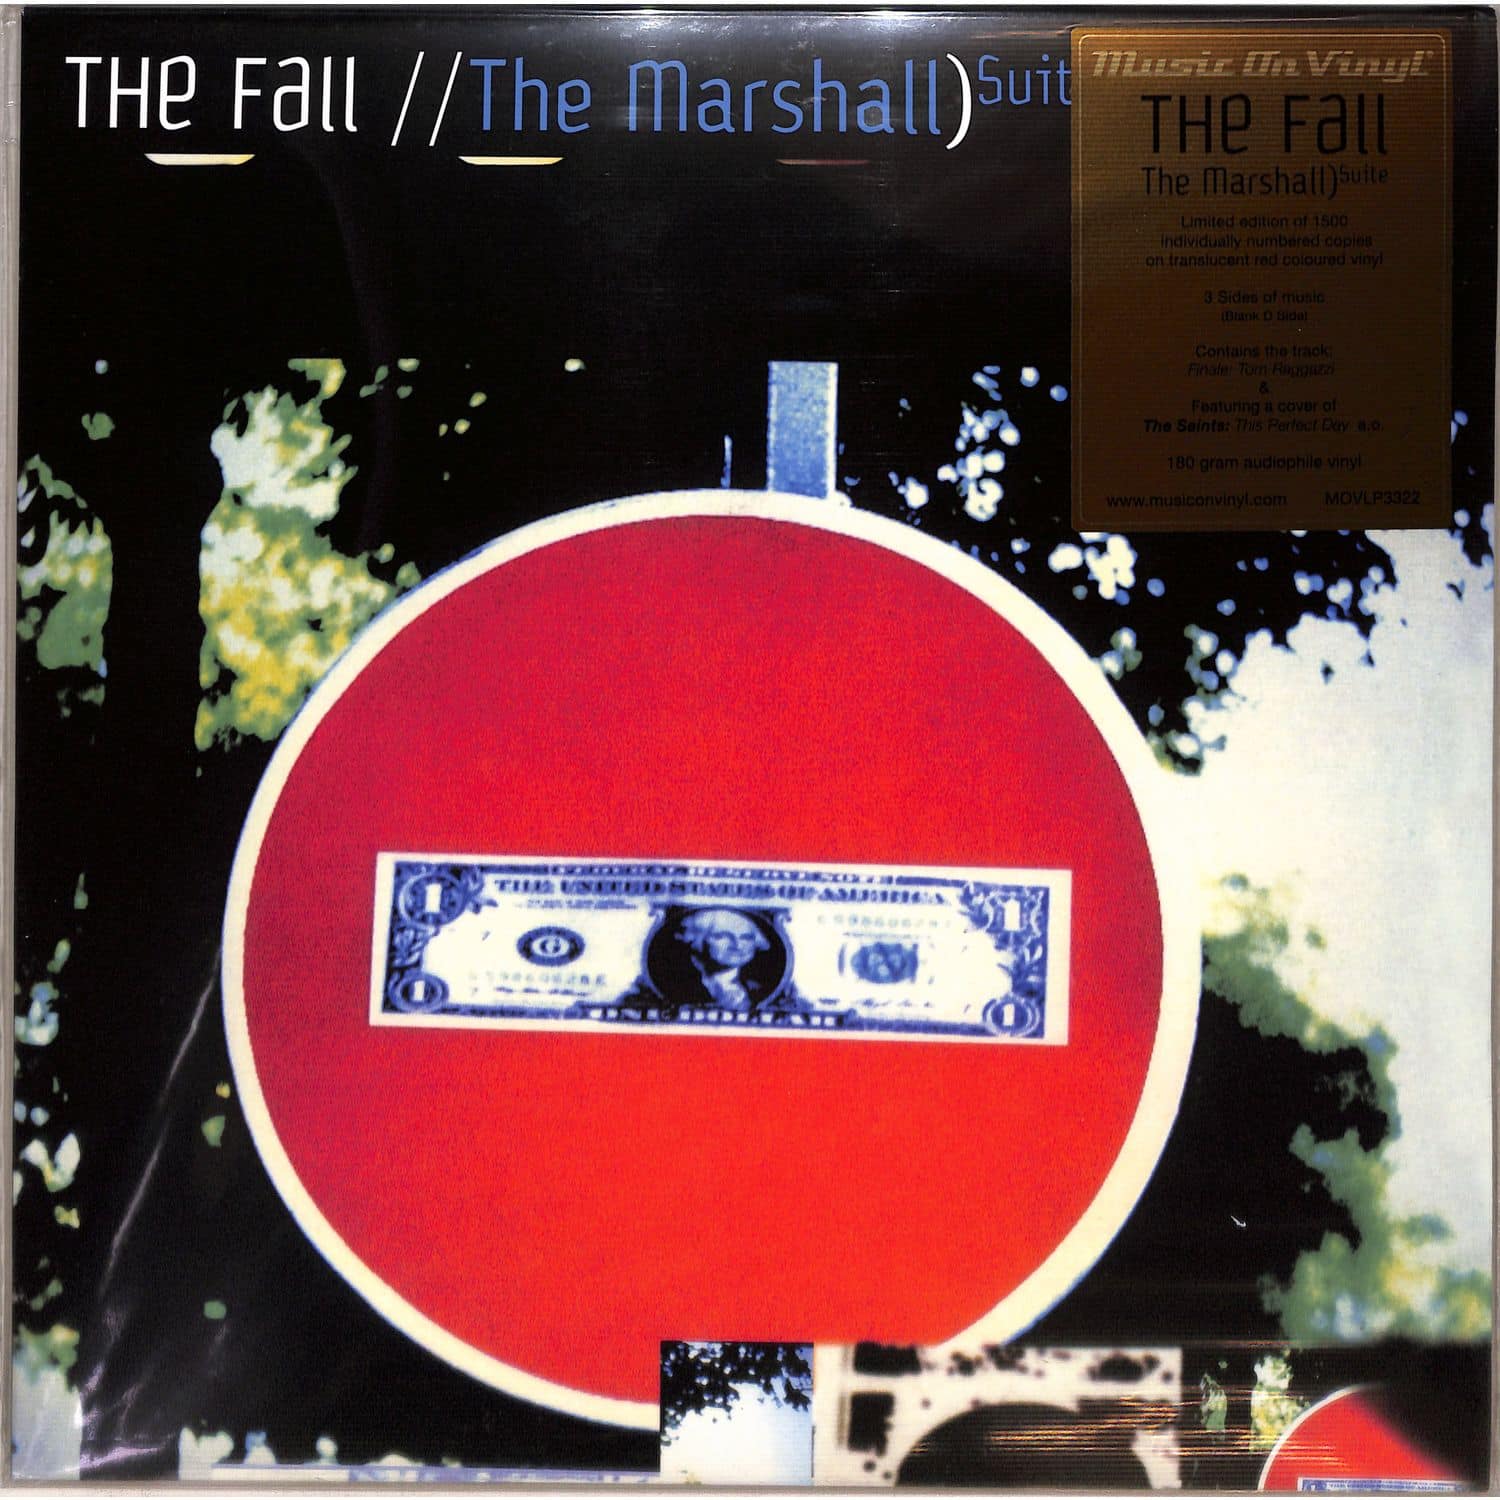 Fall - MARSHALL SUITE 